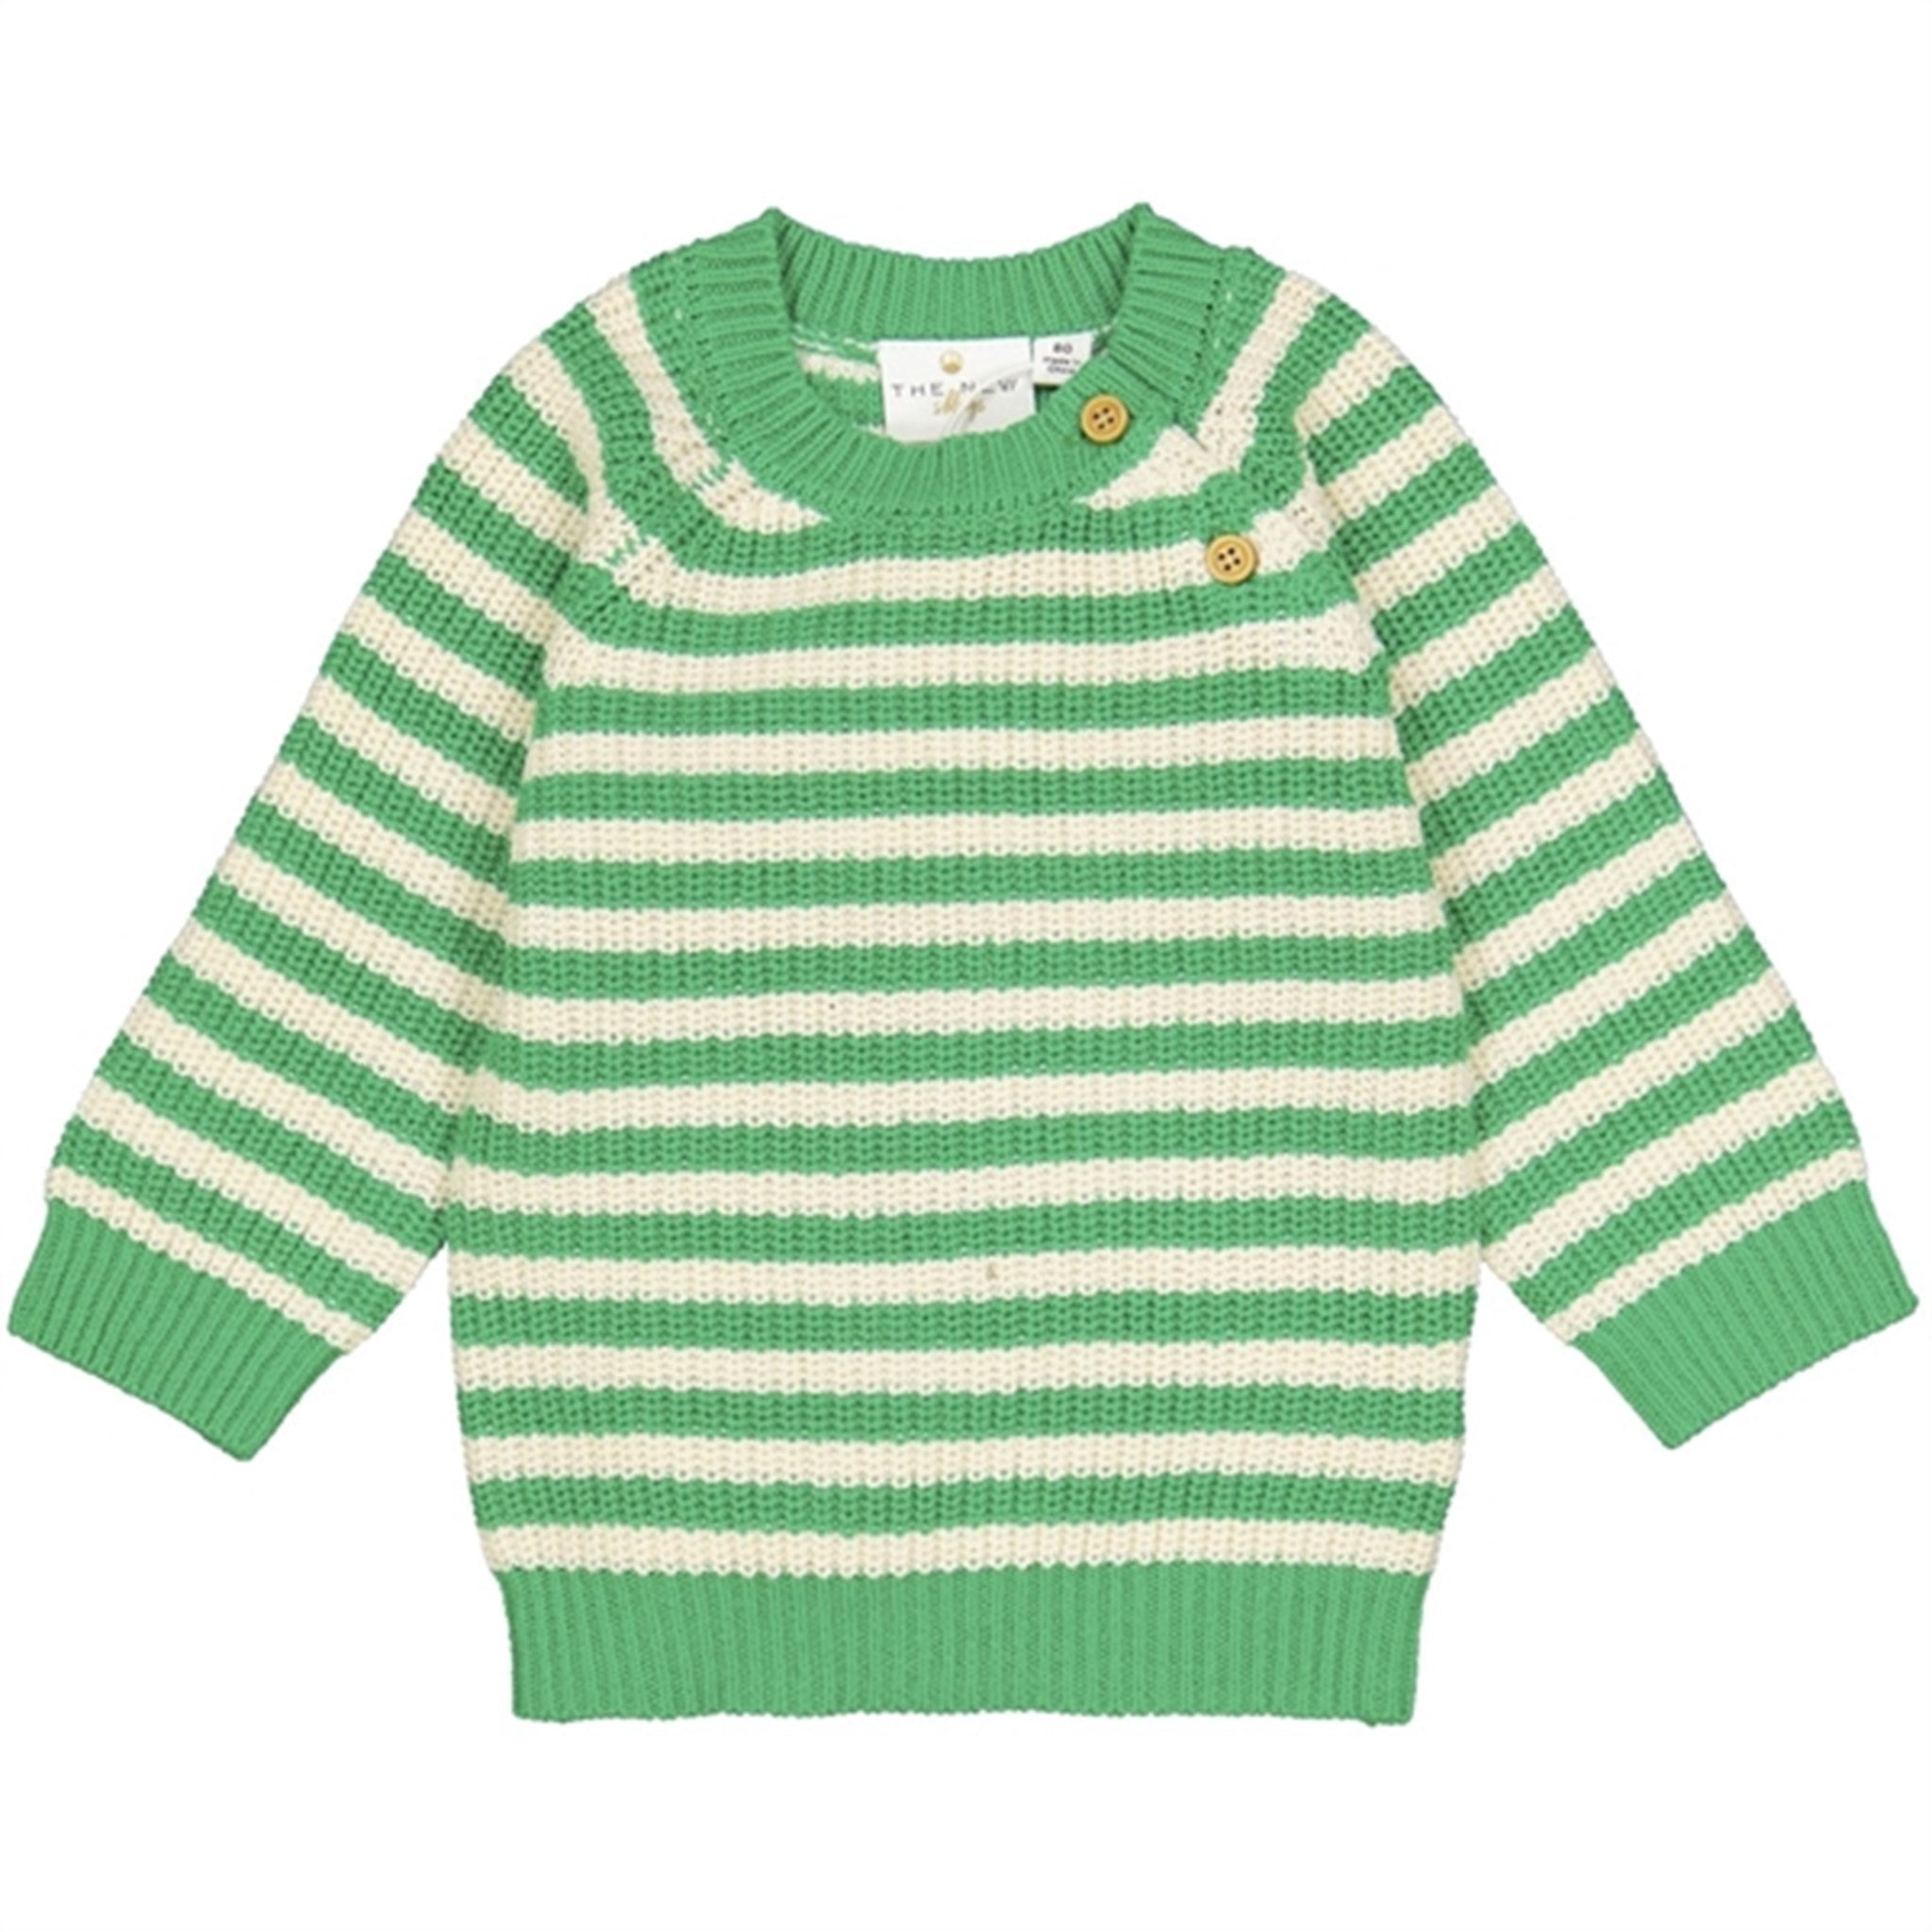 THE NEW Siblings Bright Green Ilfred Strik Sweater